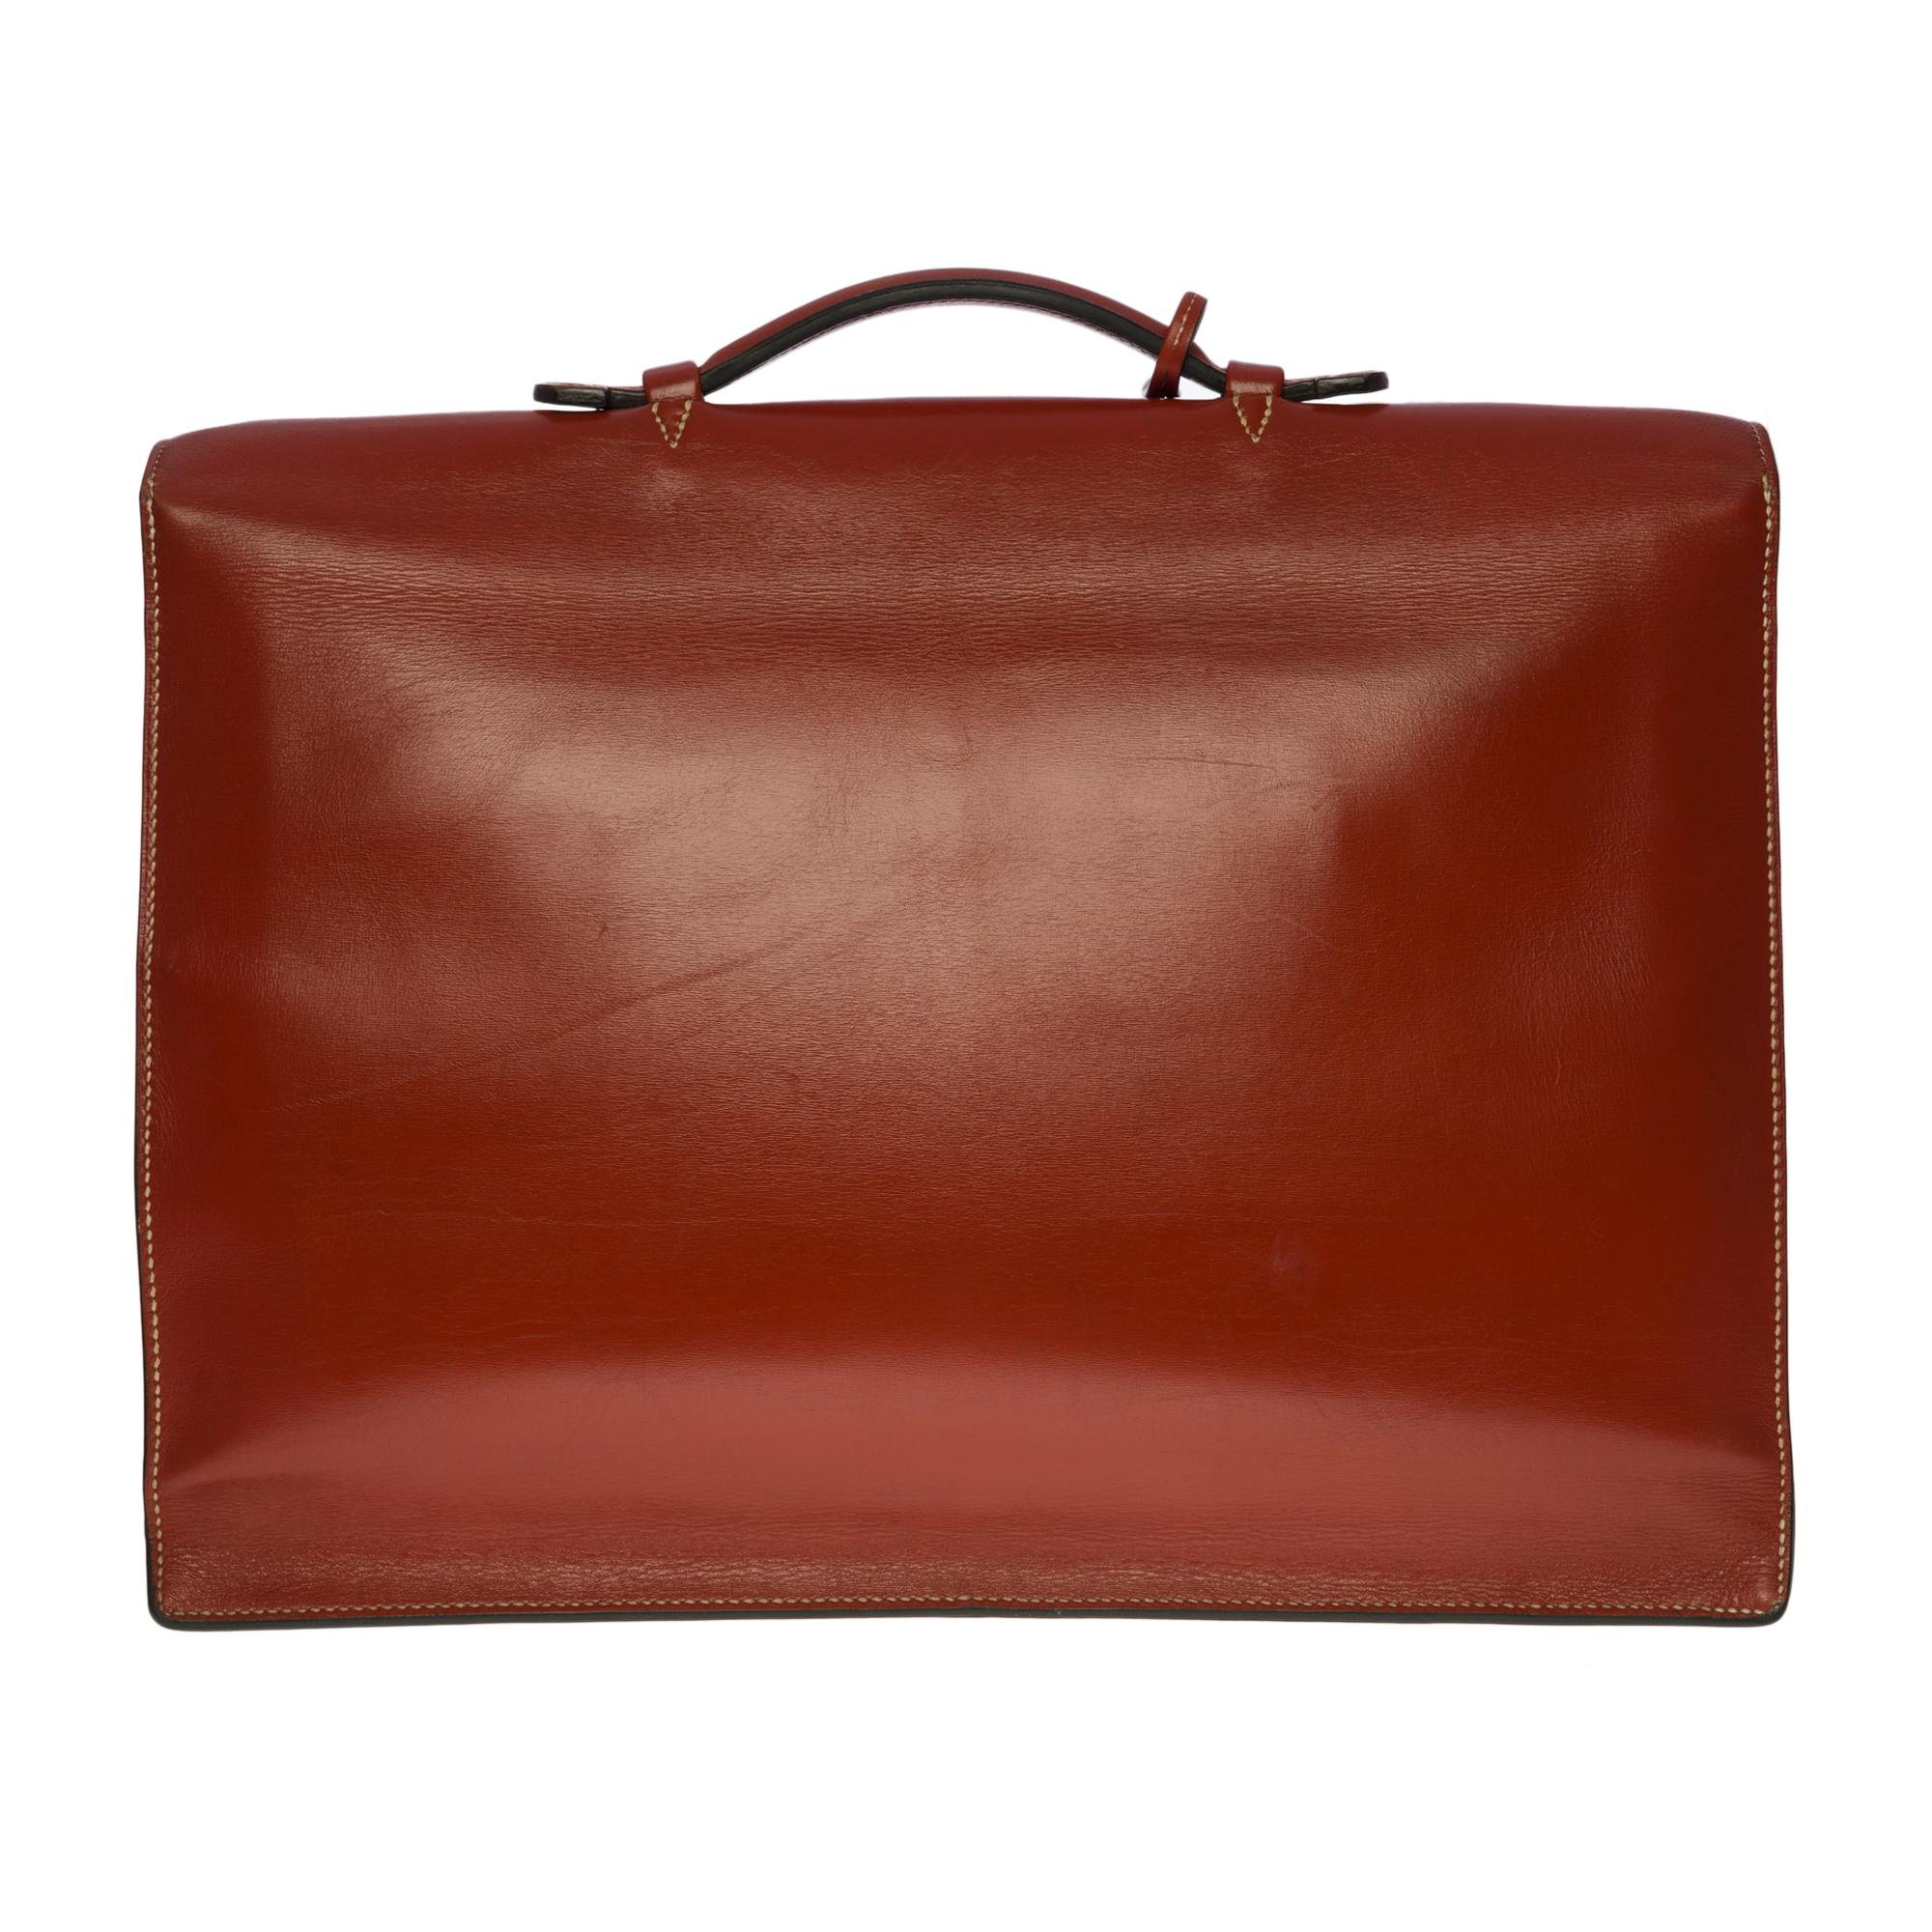 Very refined Hermès briefcase Dispatches bag in rouge brique box leather, gilded metal hardware, simple handle in red brick leather allowing a hand-carried

Flap closure with lock clasp
Red suede interior with 2 bellows compartment
Signature: